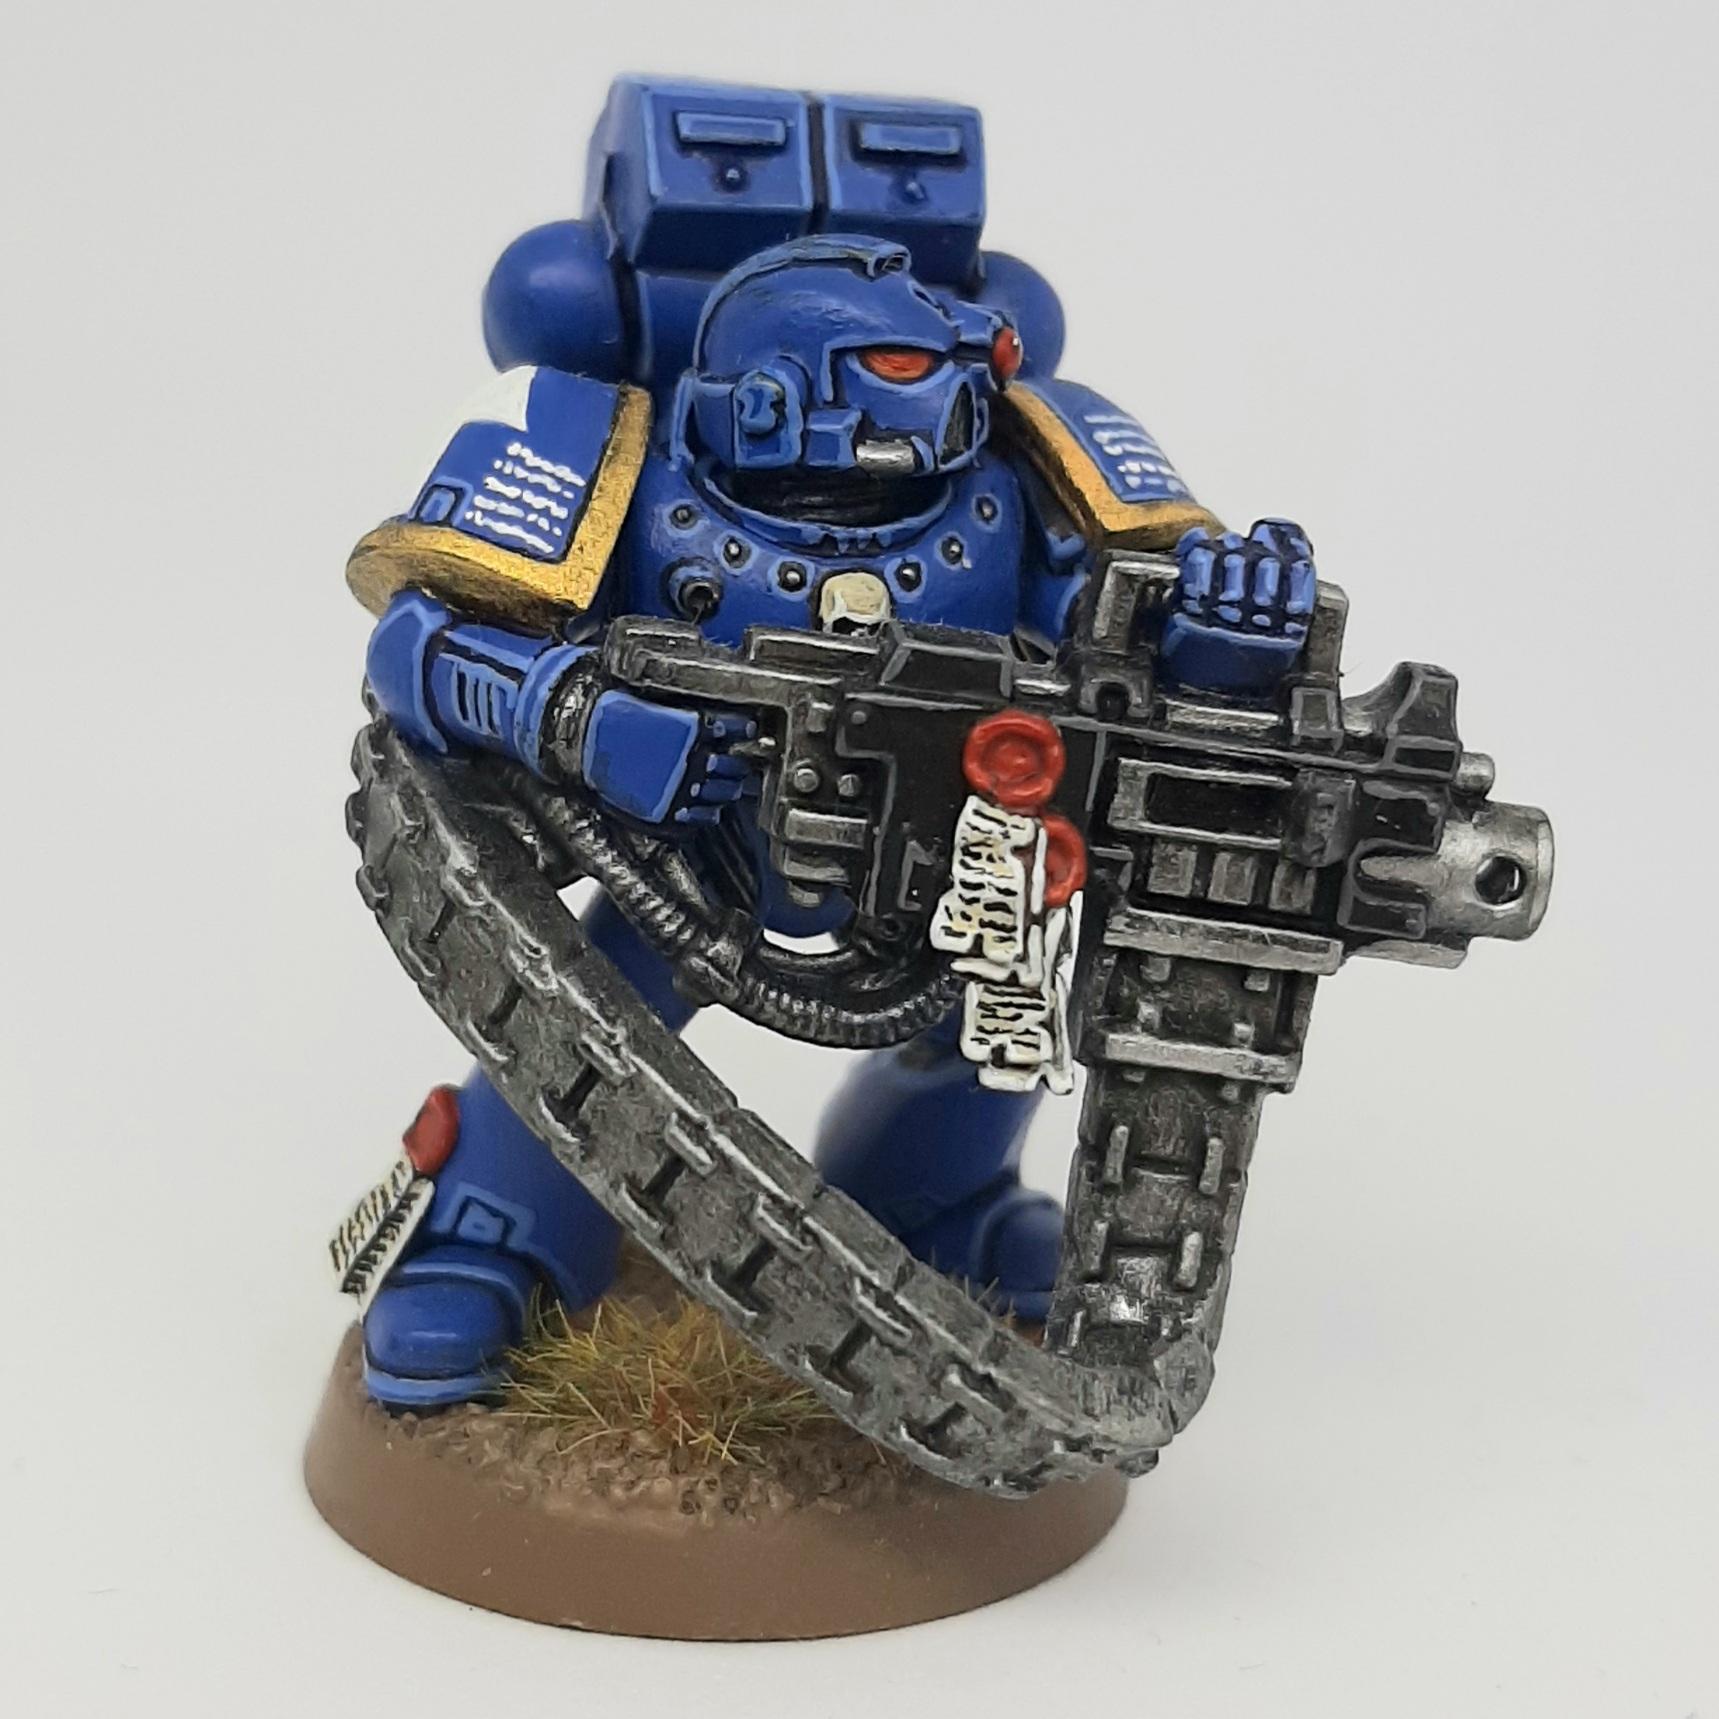 Bolter, Conversion, Custom, Heavy, Kitbash, Scratch, Scratch Build, Space, Space Marines, Tactical, Ultramarines